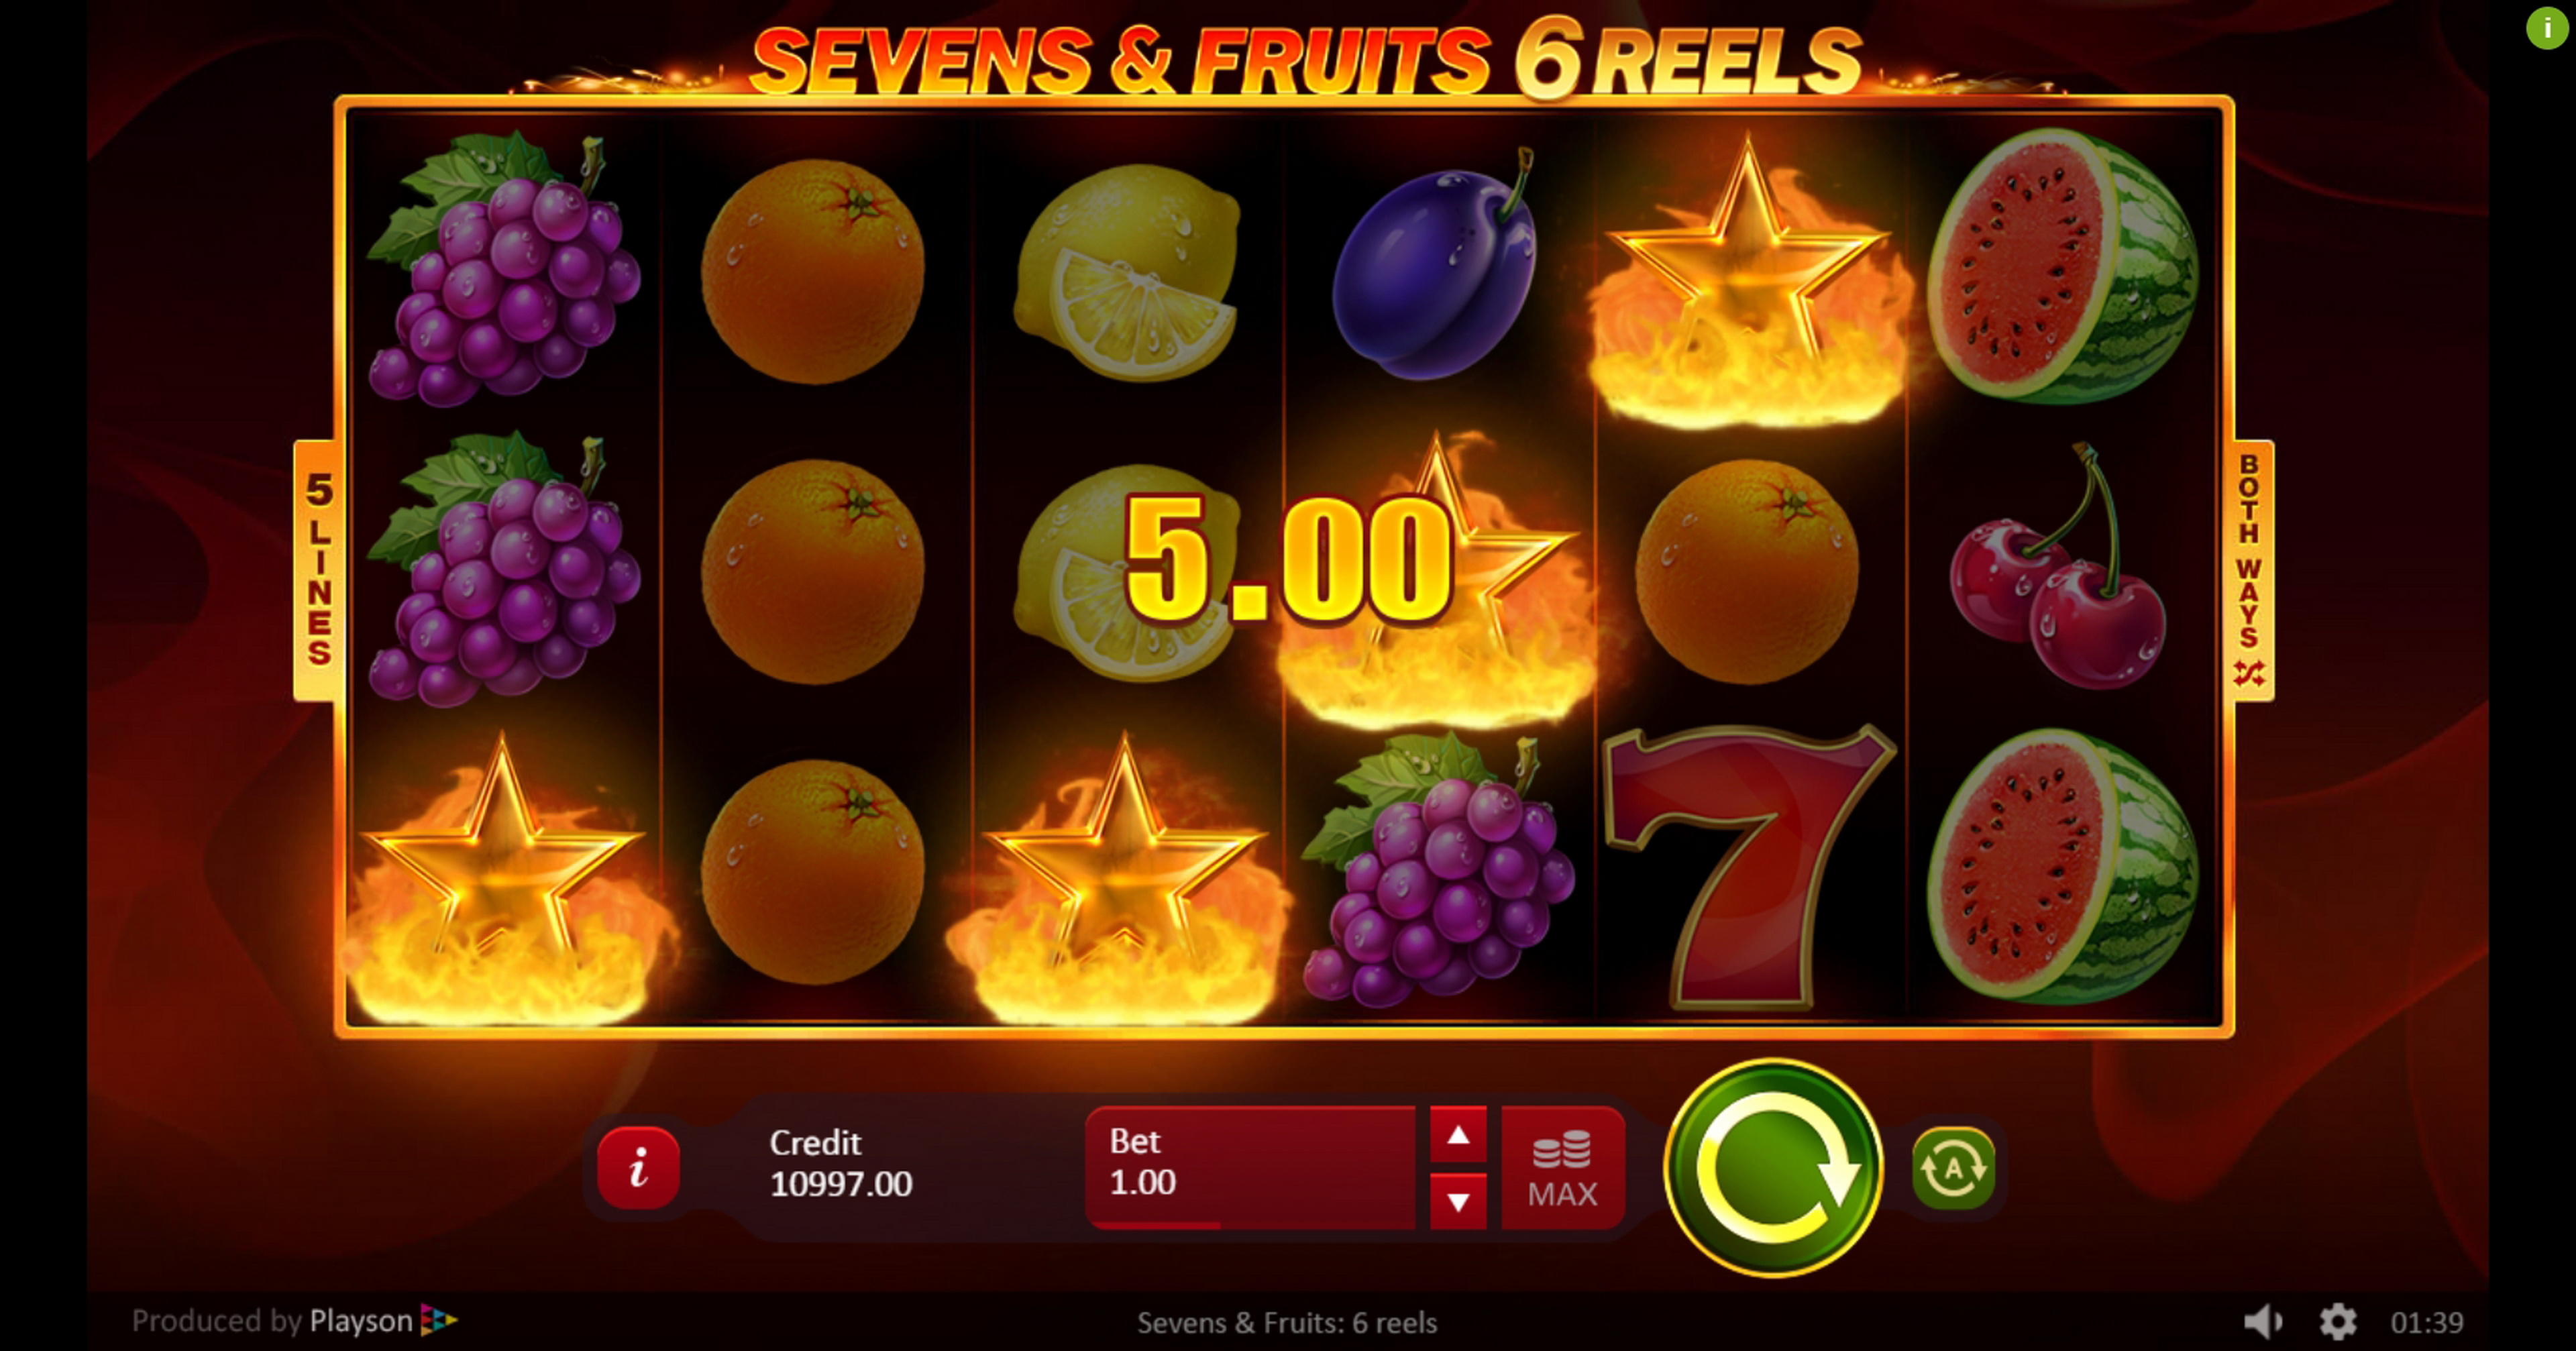 Win Money in Sevens and Fruits: 6 Reels Free Slot Game by Playson